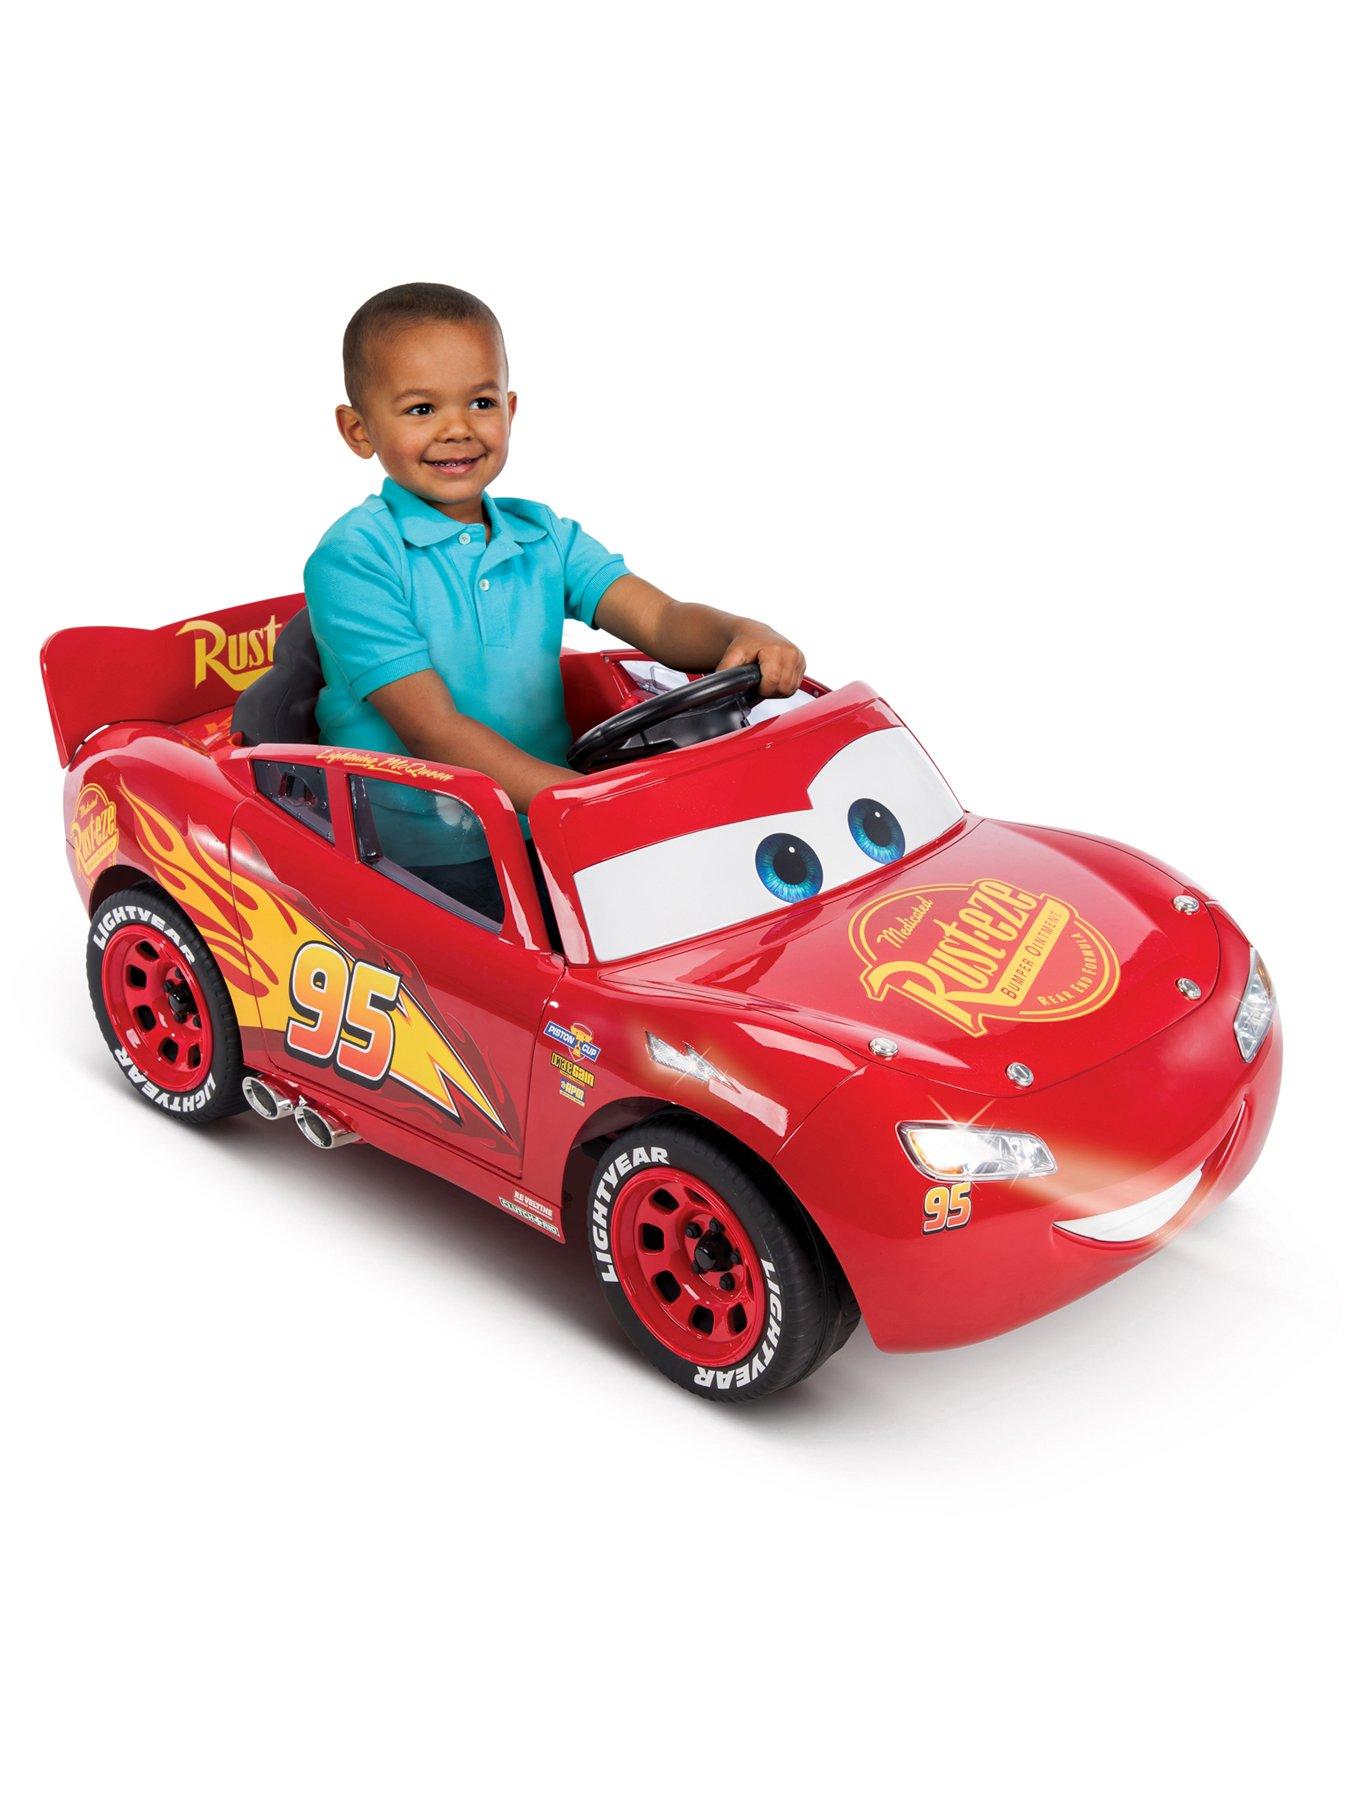 Mattel Disney and Pixar Cars Moving Moments Toy Truck with Moving Eyes &  Mouth, Mater Character Car, Approx. 7 inches Long